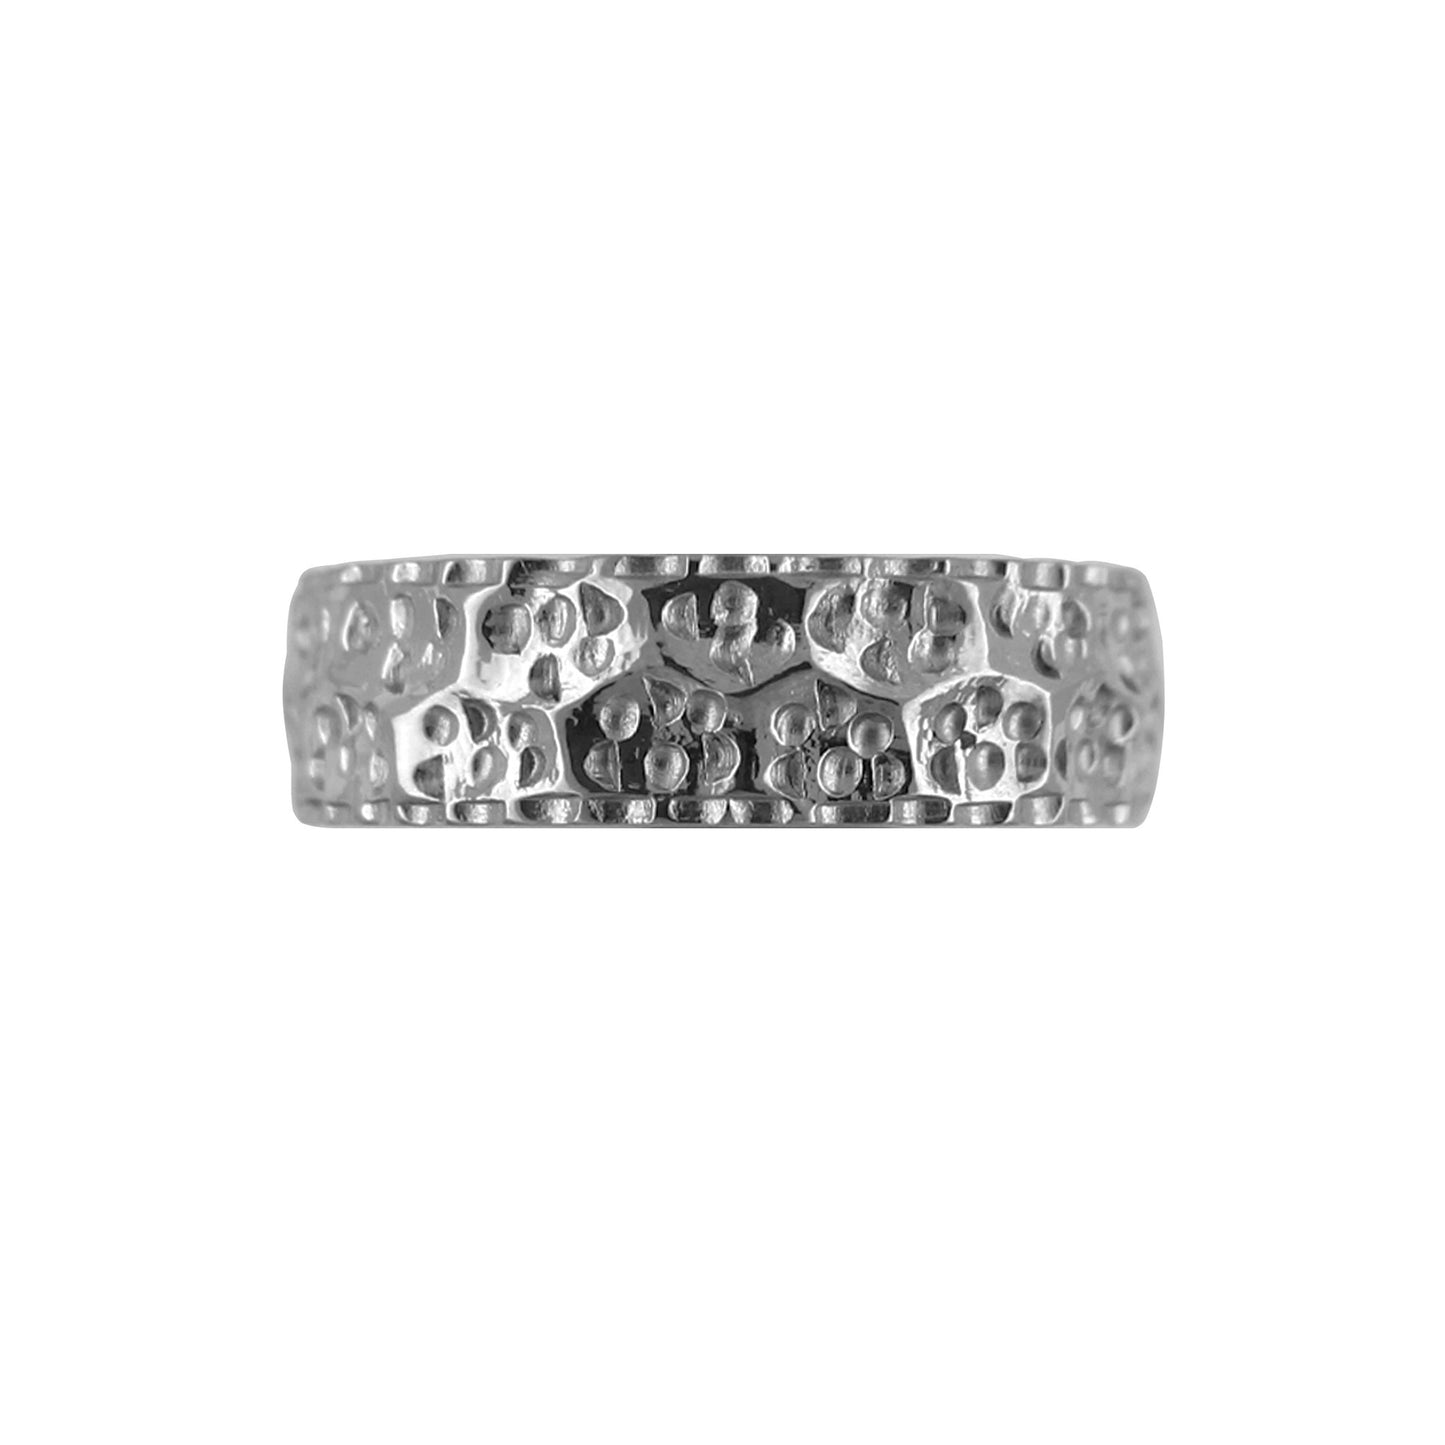 Tantalum Ring w/o min. Lava Pattern Polished Ring profile: width: 7.0 mm || height: 2.0 mm. Top view.